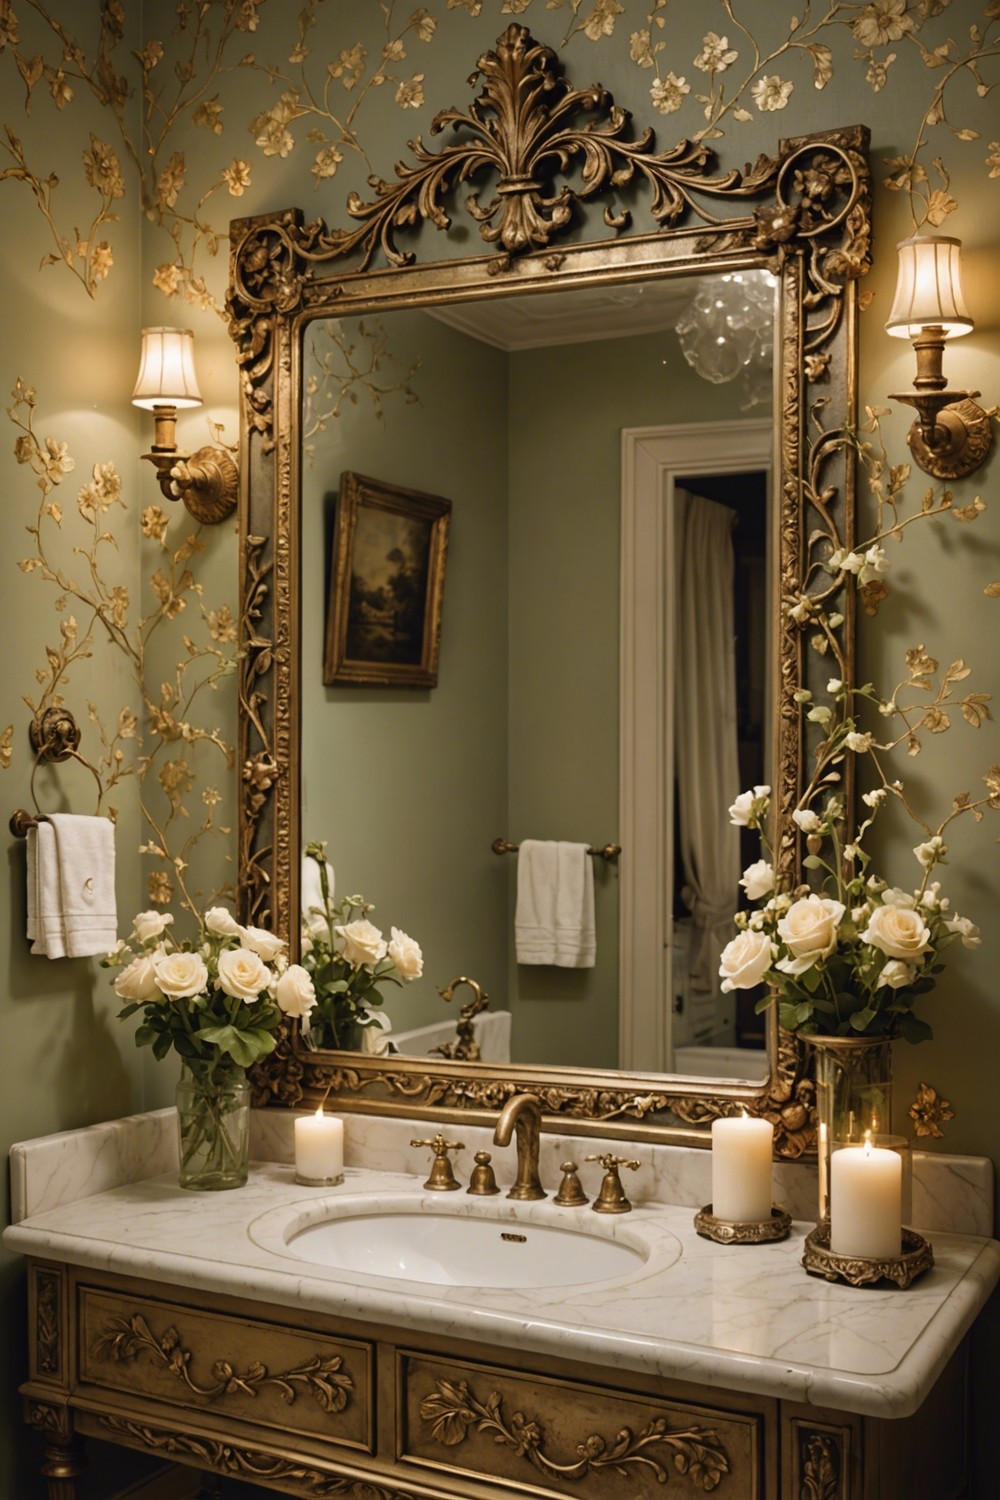 Mirrors with Etched Designs for a Vintage Look